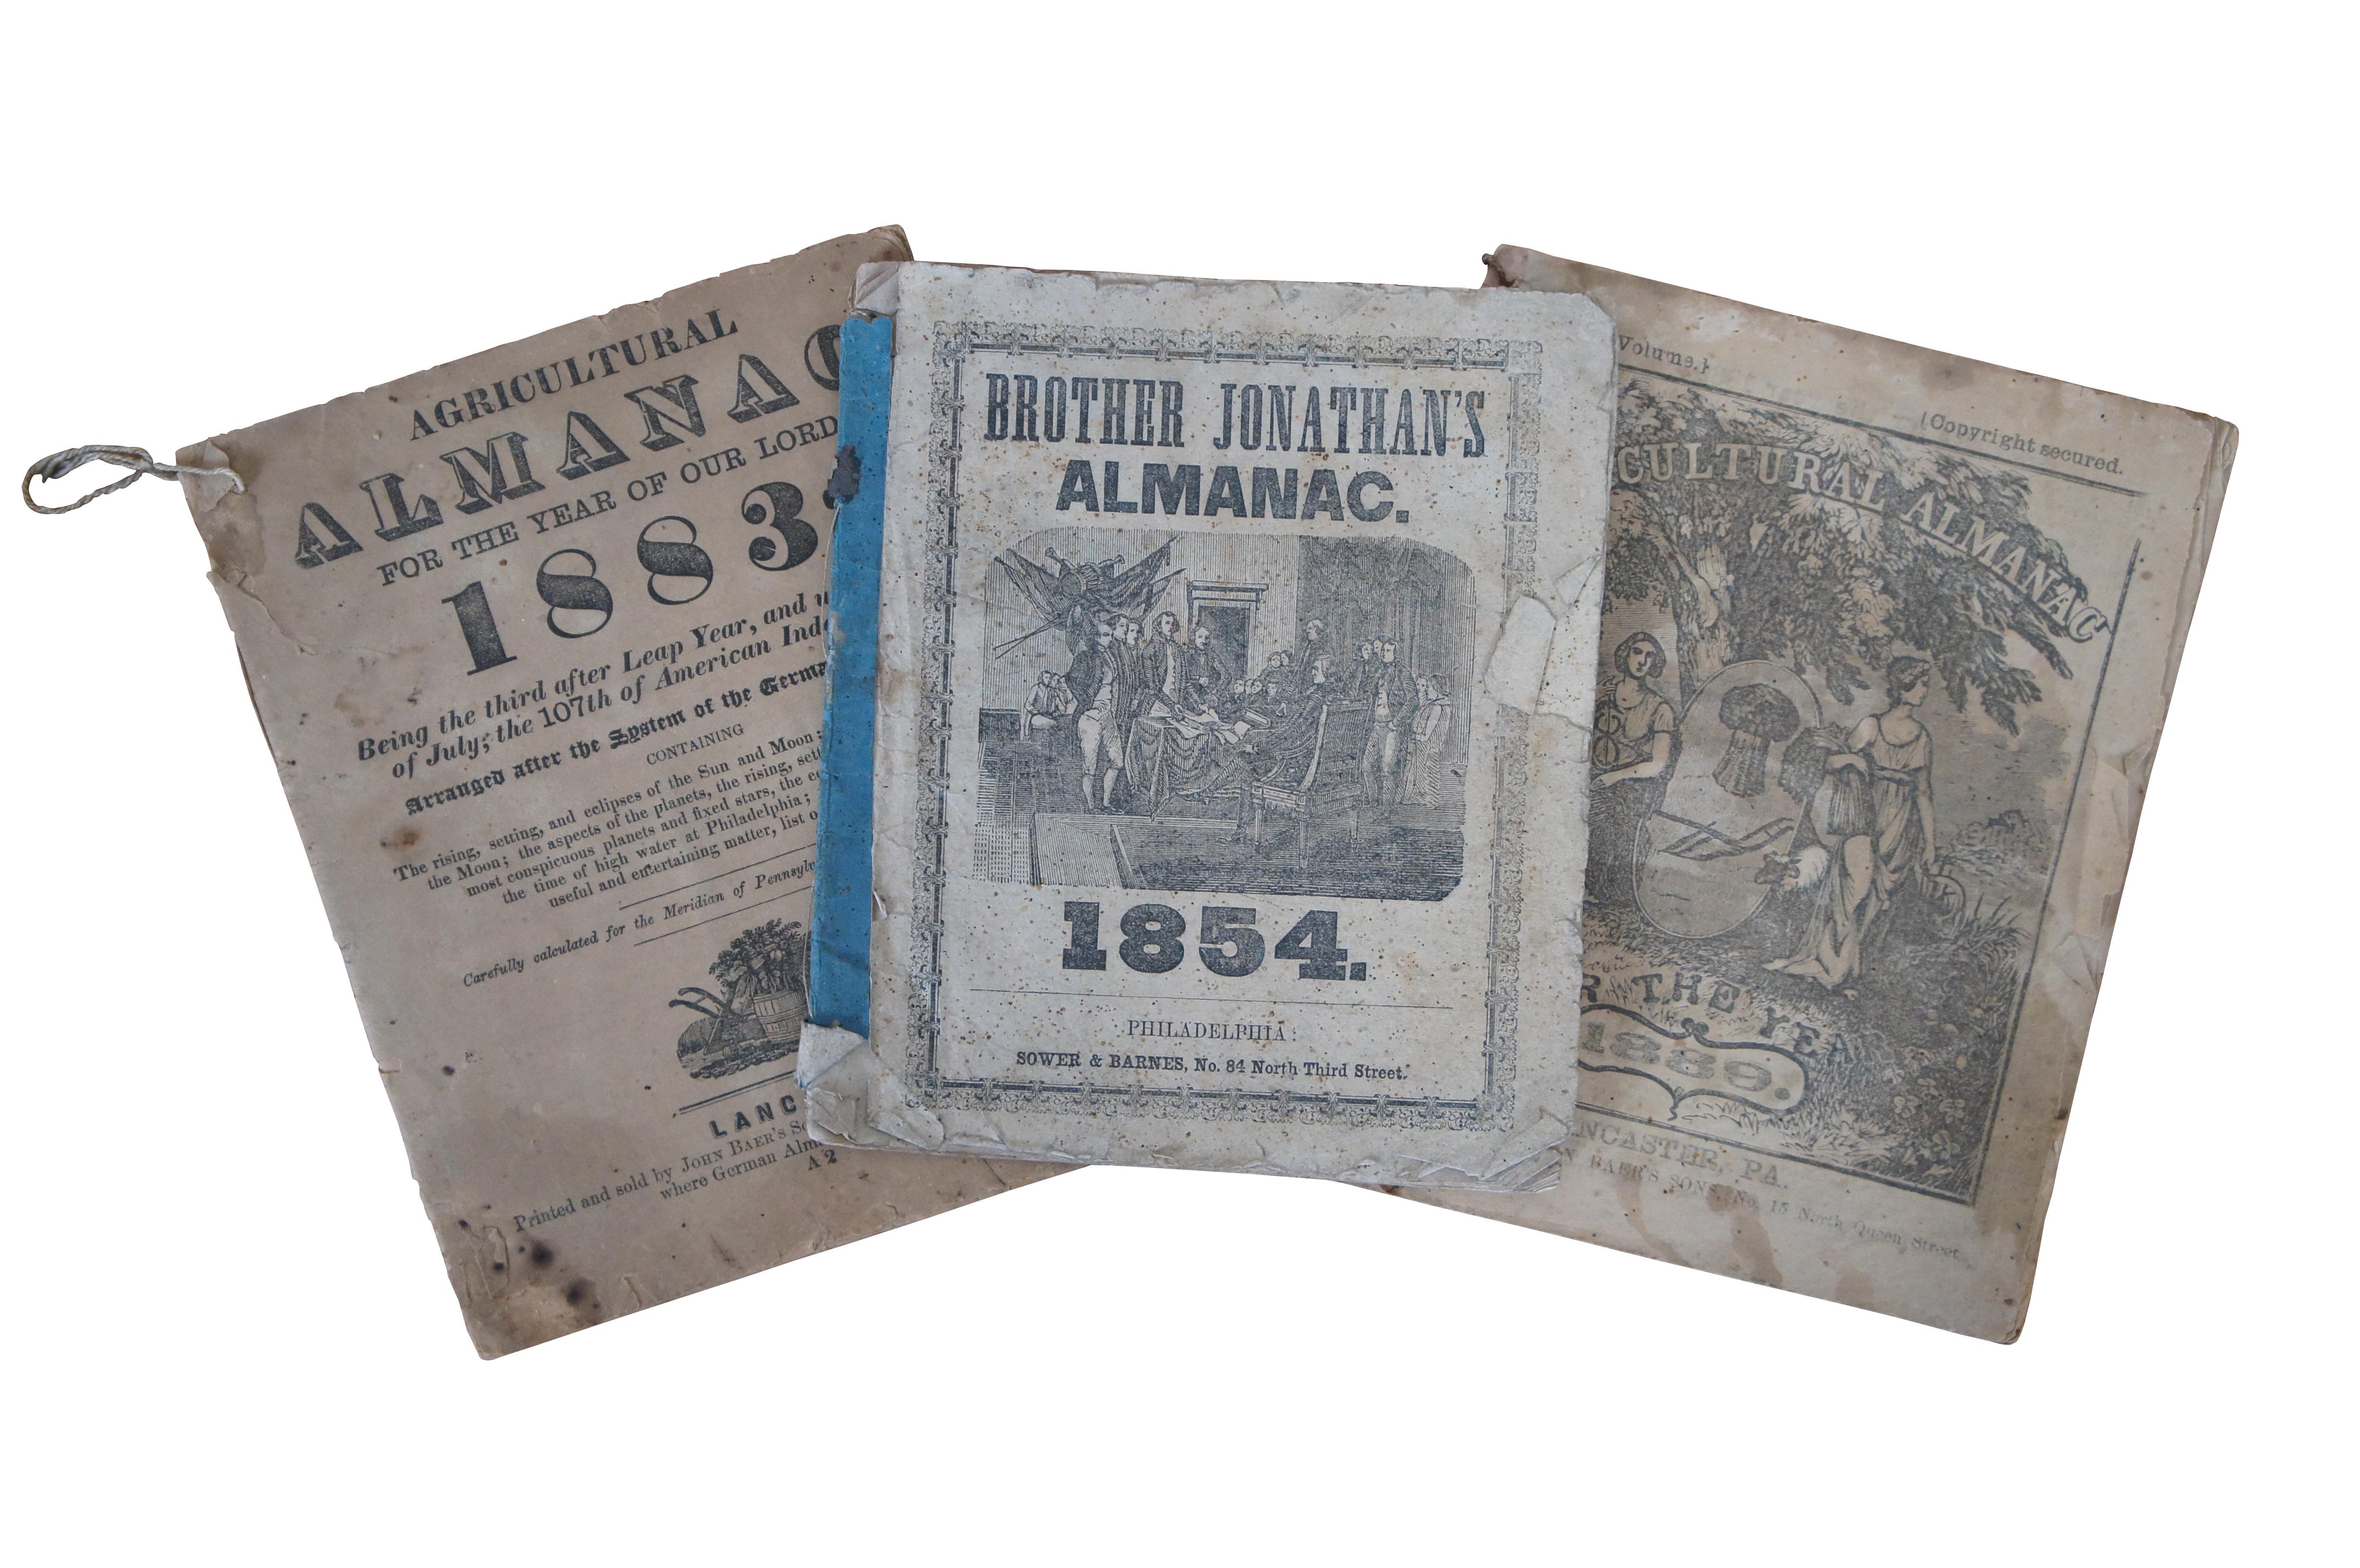 Brother Jonathan’s Almanac 1854 – Sower & Barnes, Philadelphia
Agricultural Almanac, for the Year of Our Lord 1883 – Printed and Sold by John Baer’s Sons, Lancaster
Agricultural Almanac for the Year 1889 – Printed and Sold by John Baer’s Sons,